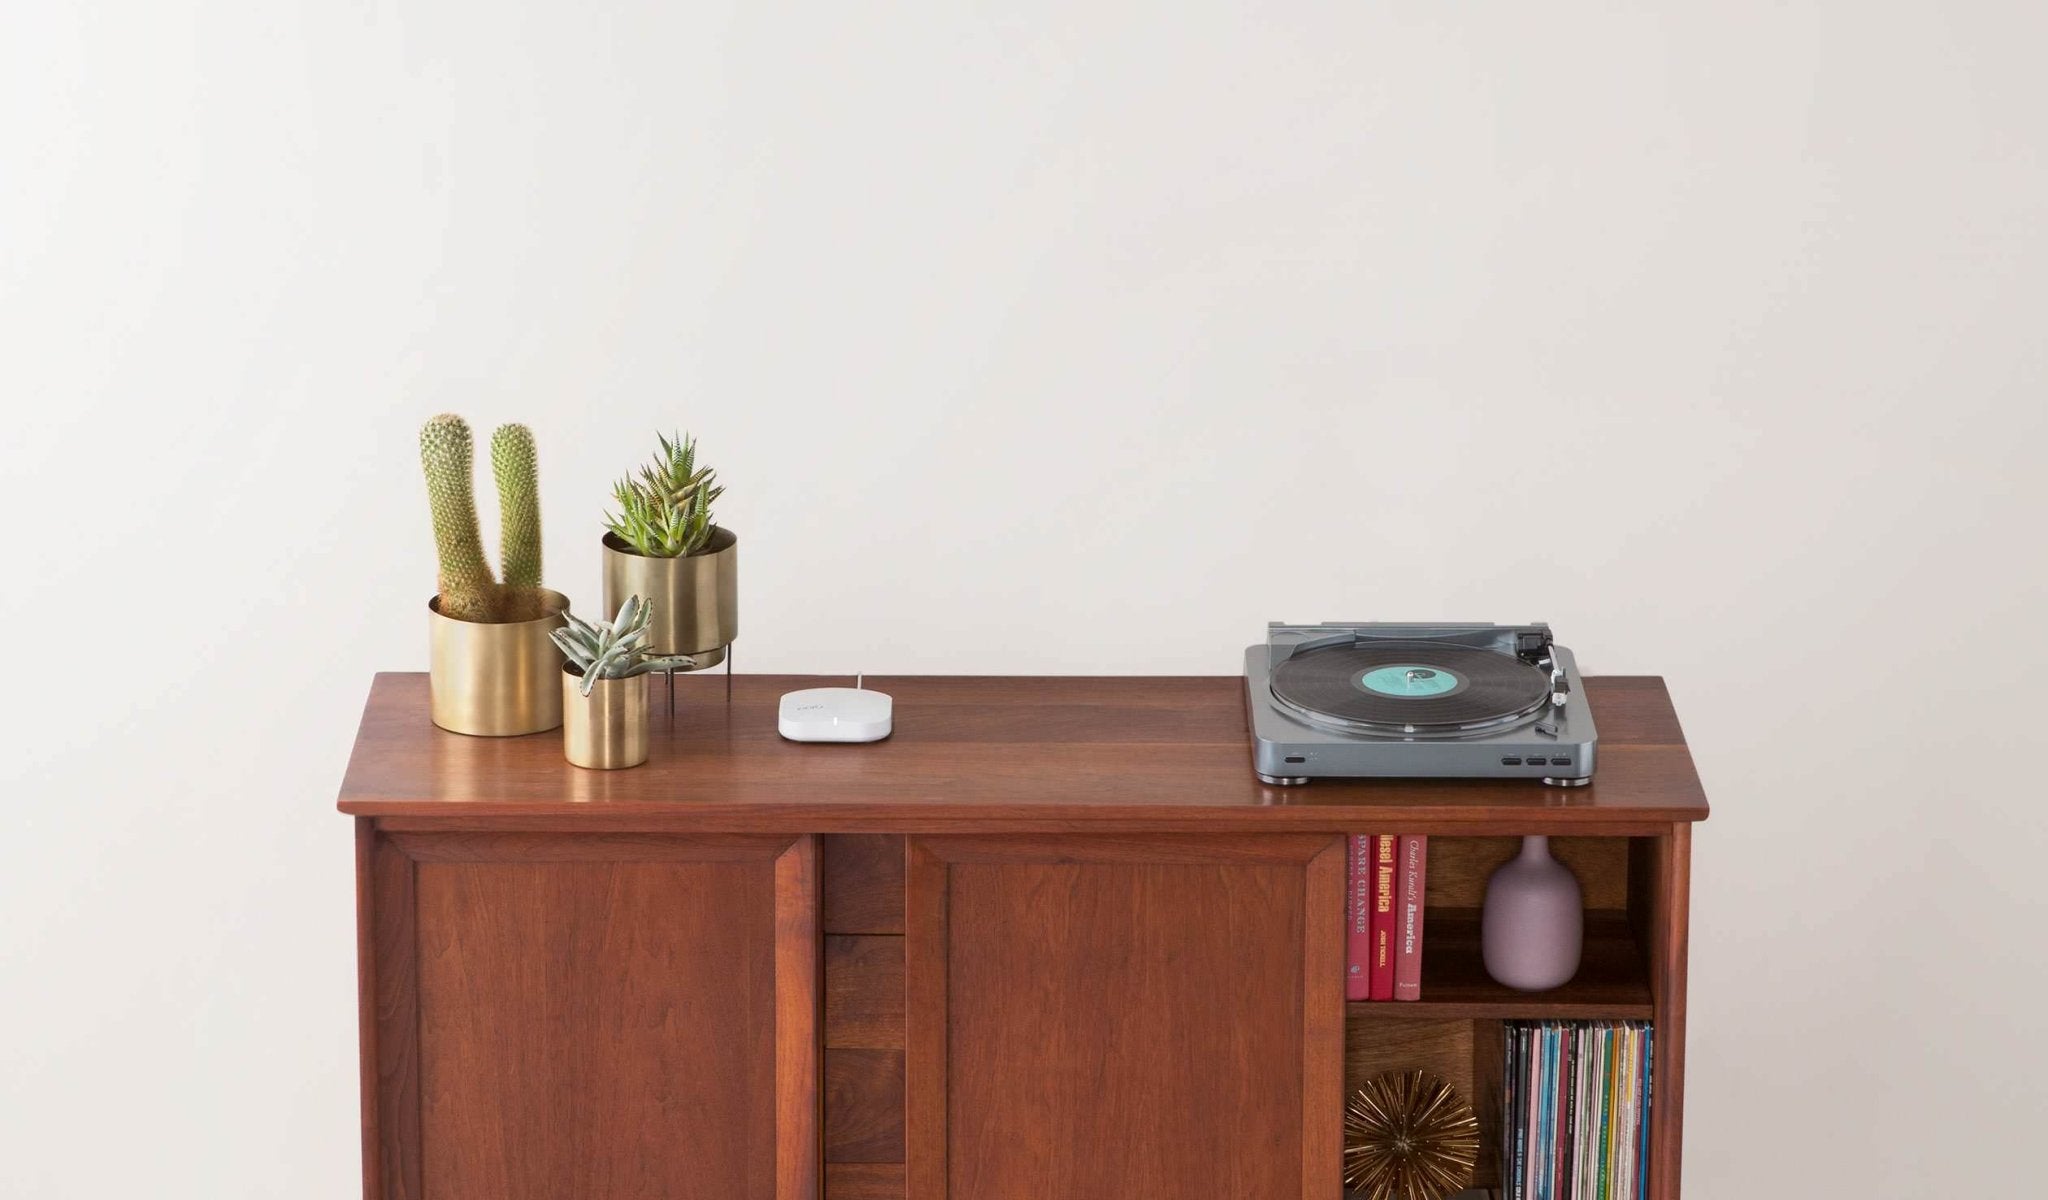 An Eero wireless mesh router installed on a wood media console.